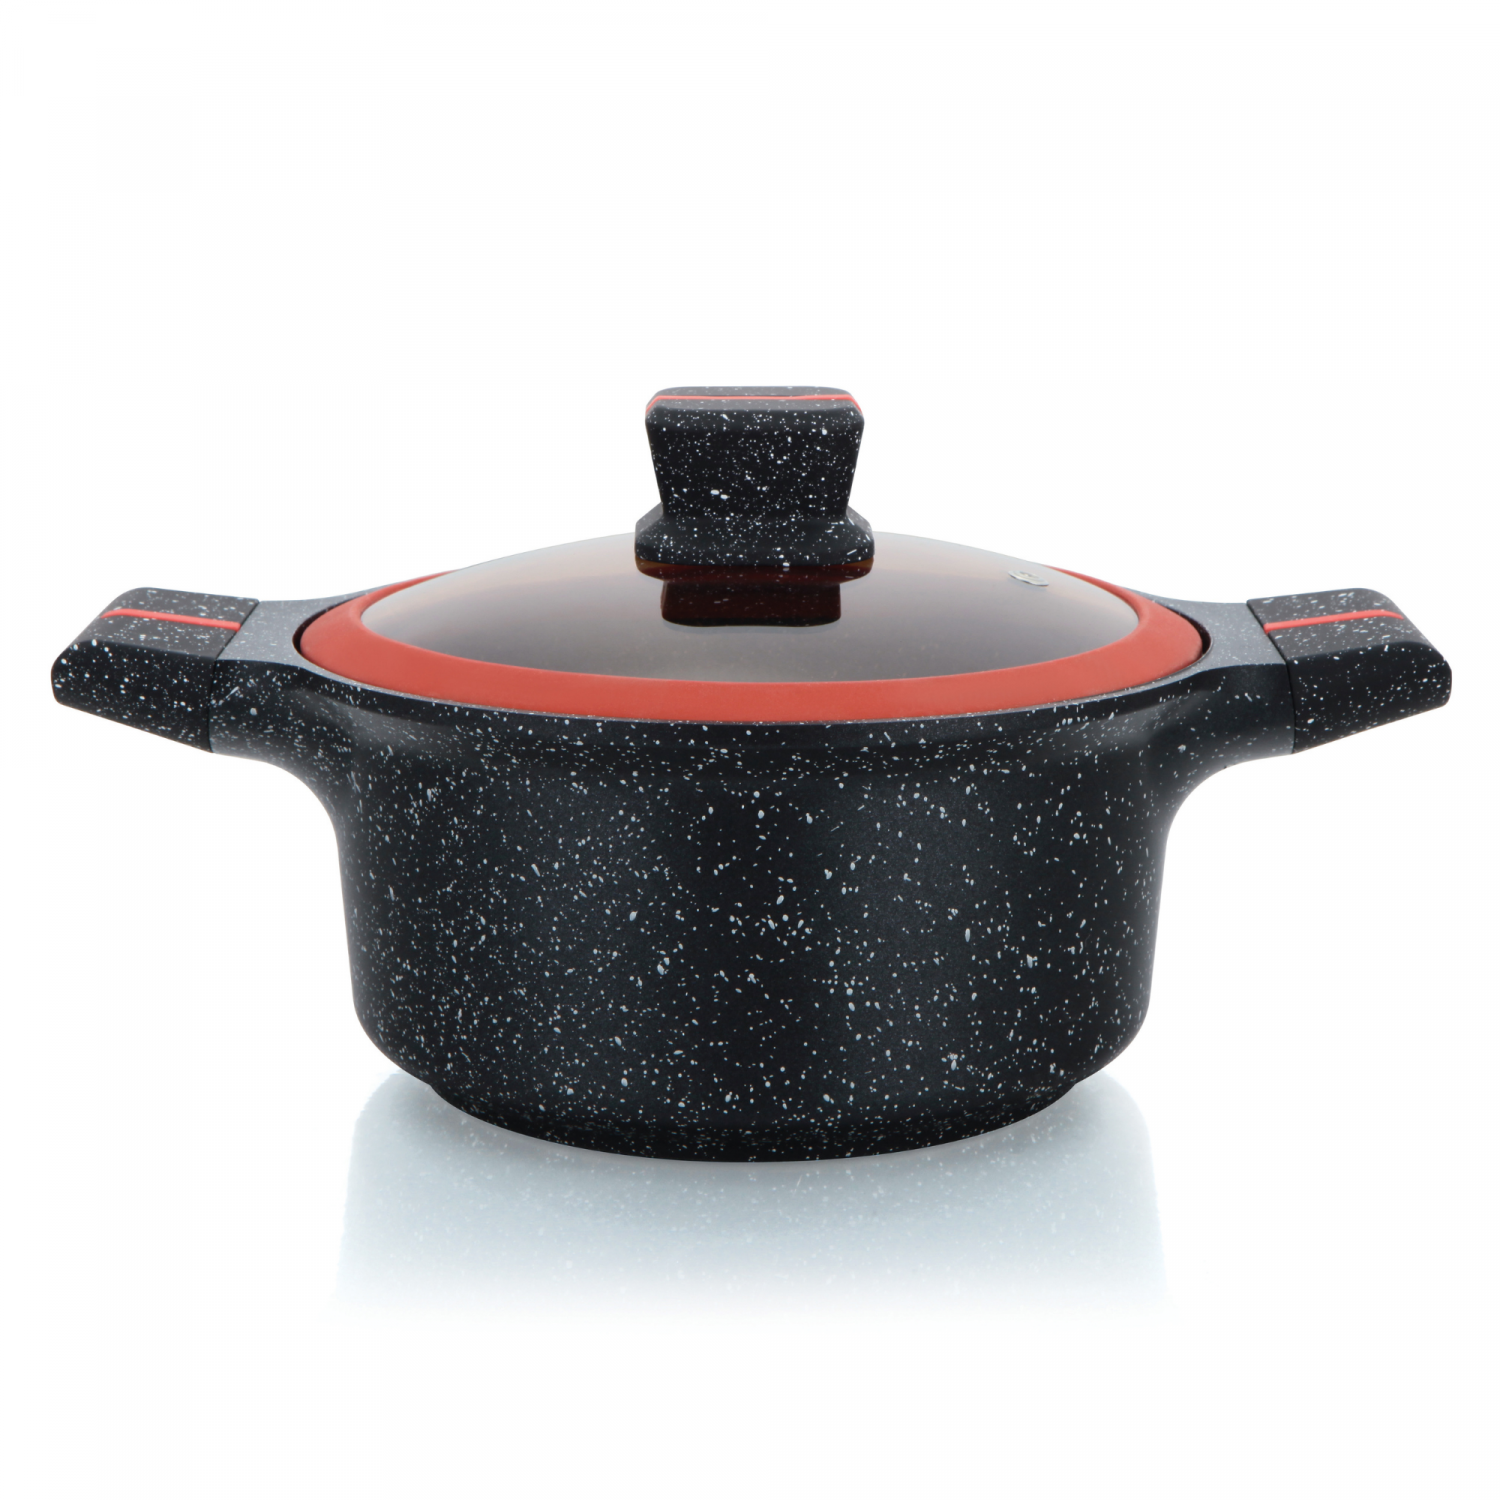 Herzberg HG-RSCAS28: Granite-Coated Casserole with Glass Lid - 28cm